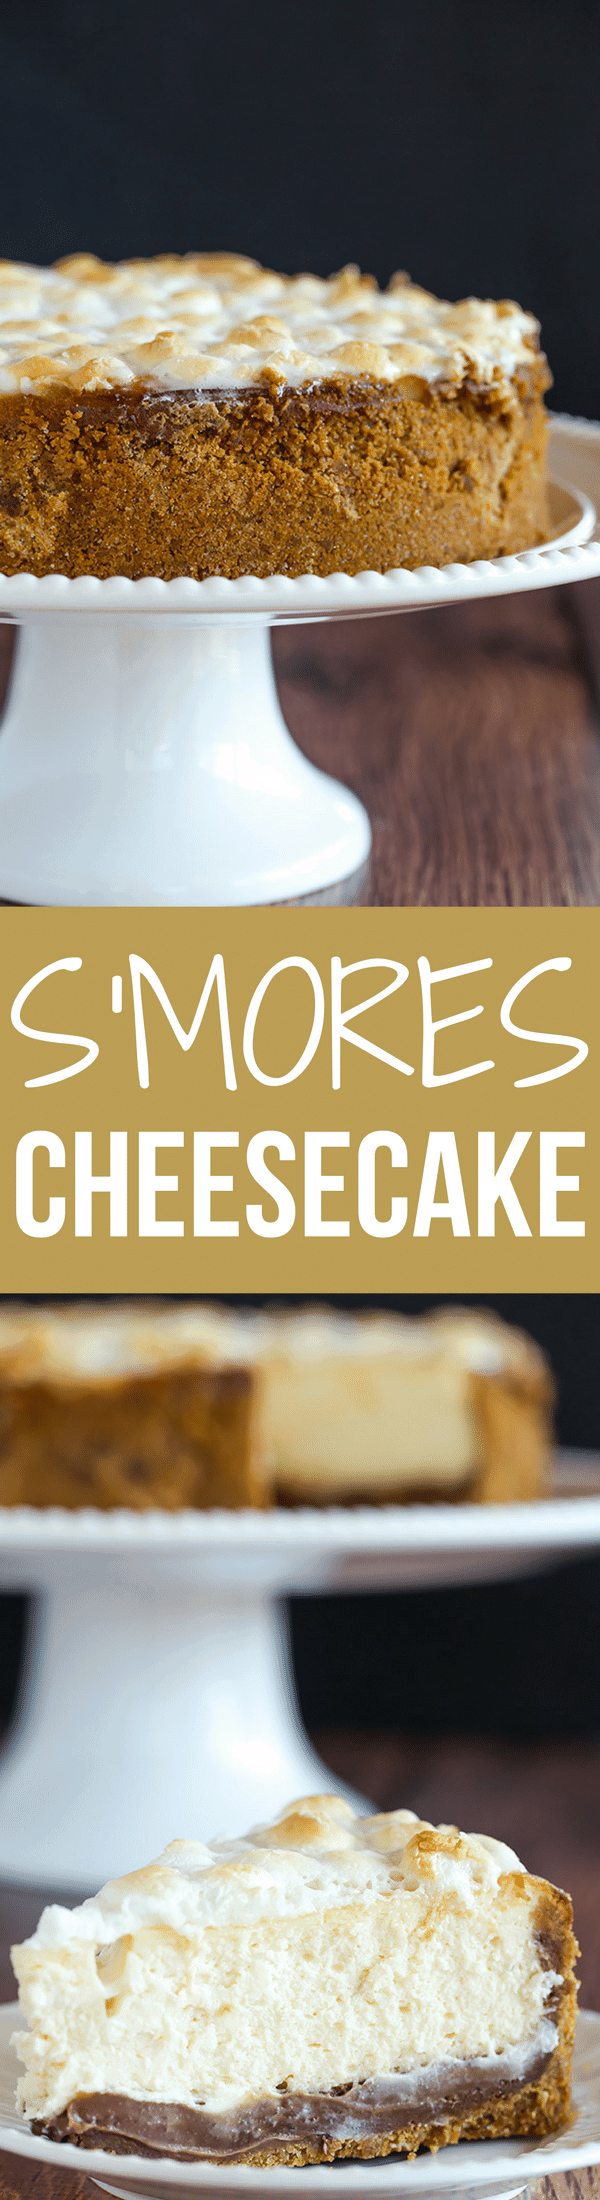 S'mores Cheesecake - The ultimate summer dessert! Graham cracker crust, chocolate fudge, and marshmallow cheesecake, all topped with toasted marshmallows.